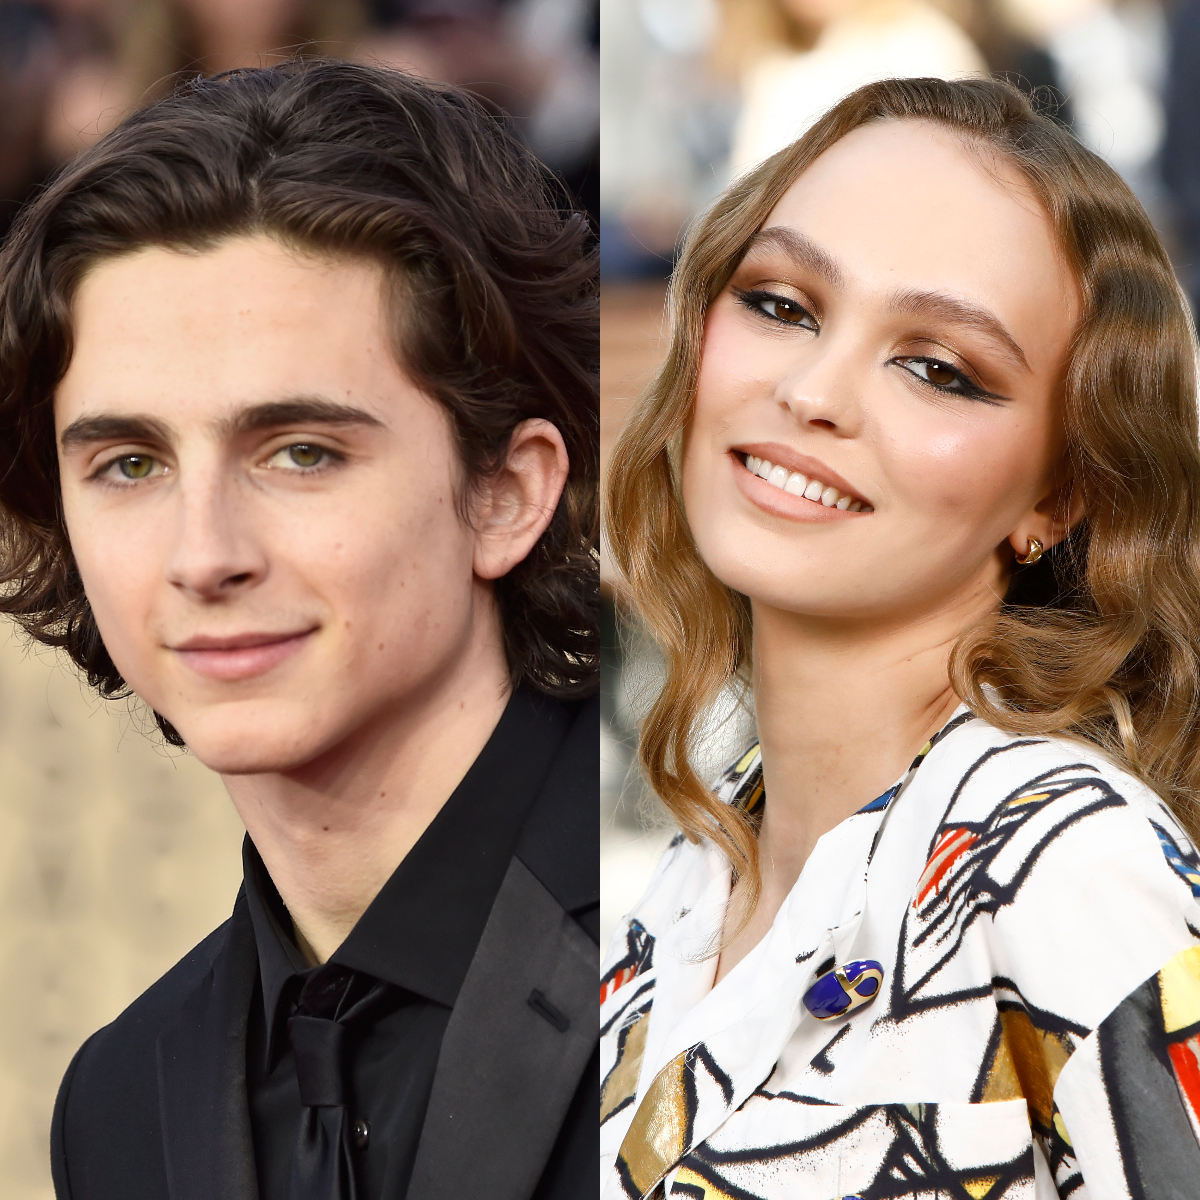 Are Timothee Chalamet and Lily-Rose Depp back together?